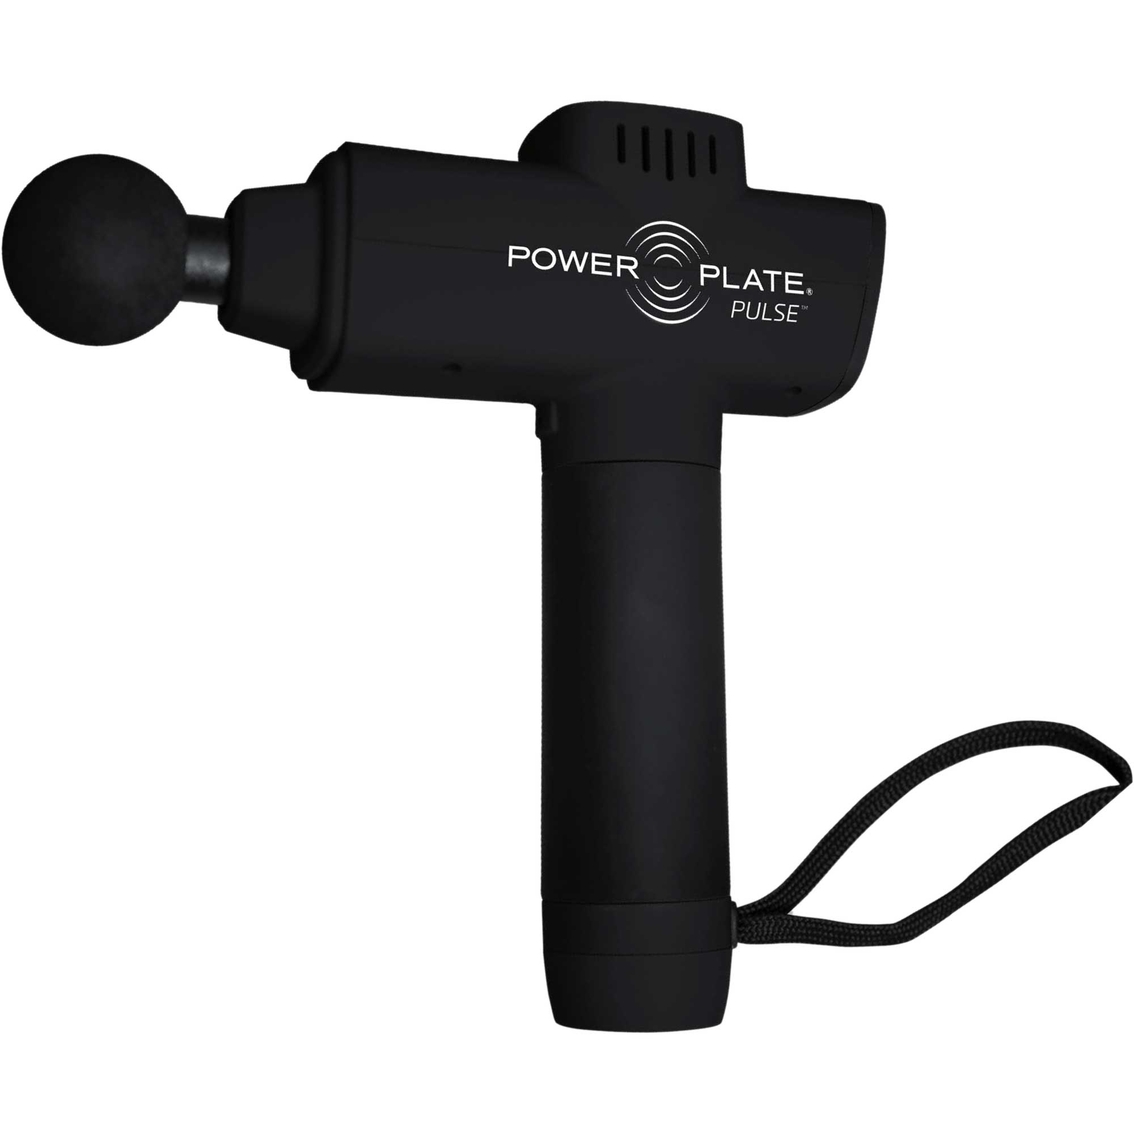 Power Plate Pulse Massager - Image 2 of 6